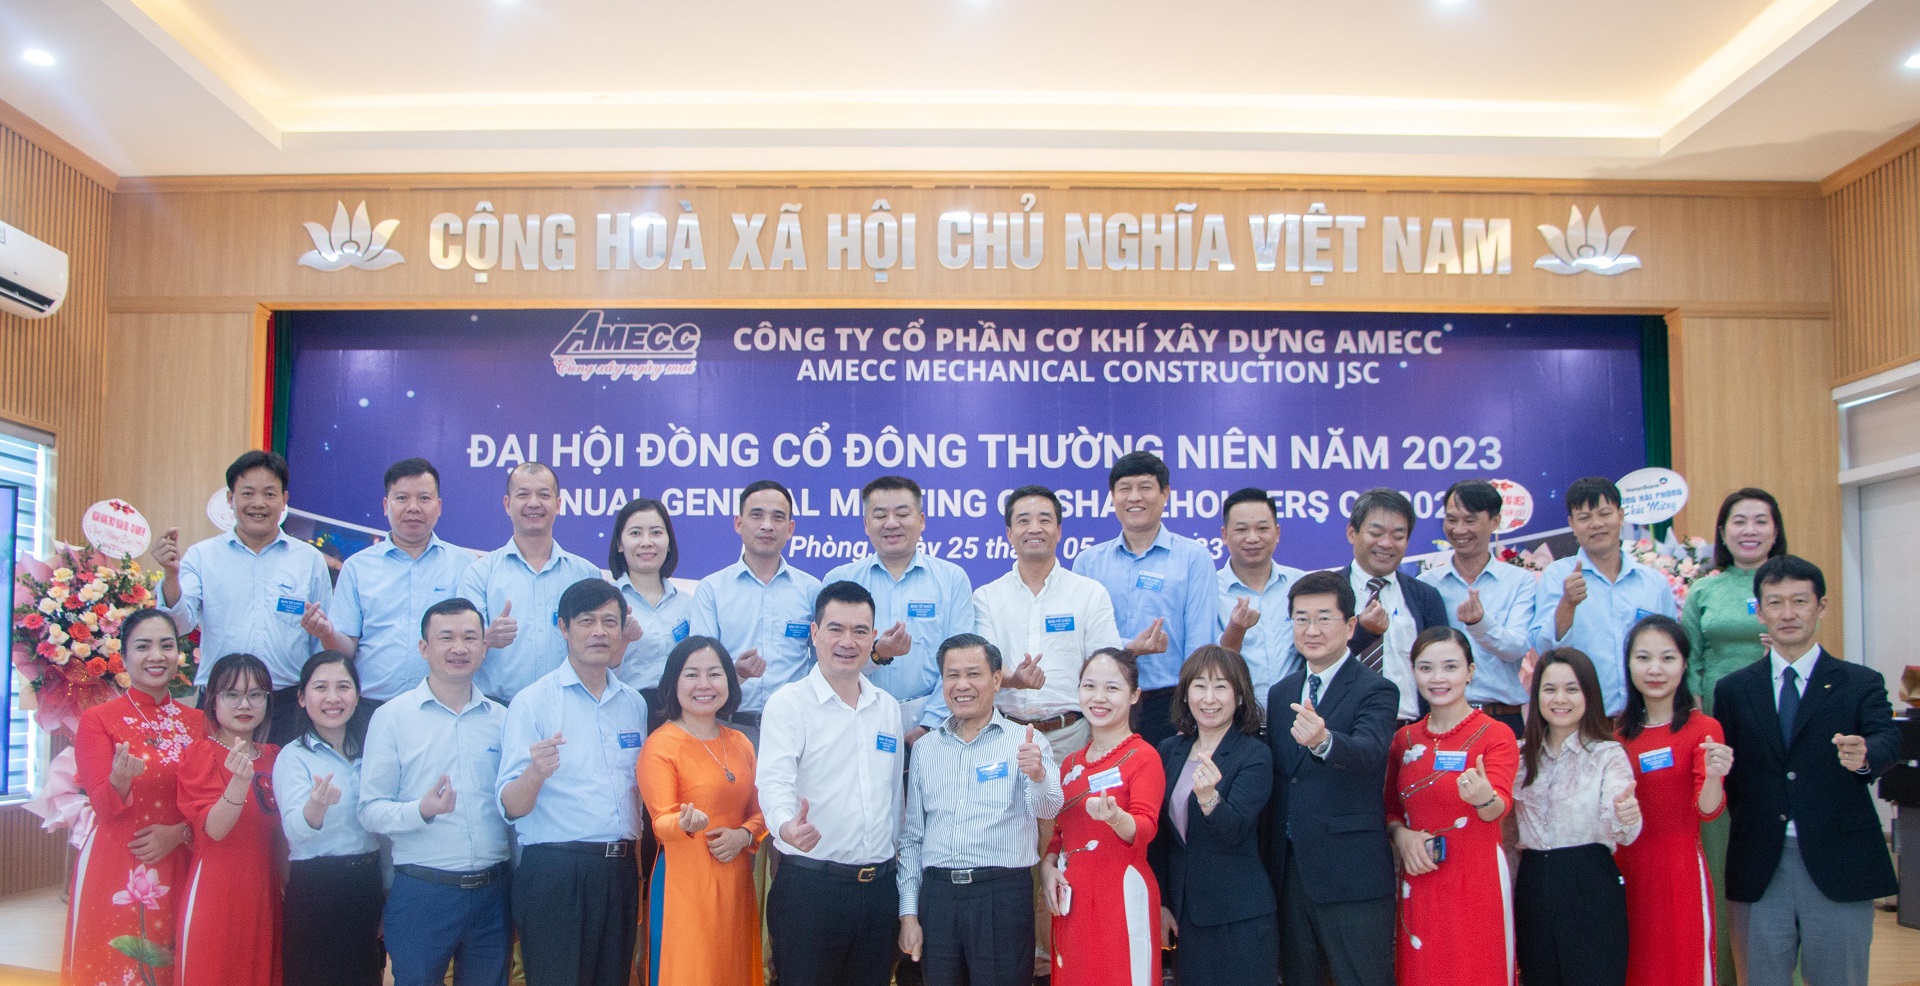 AMECC  mechanical construction joint stock company: organizes the successful annual general meeting of shareholders for the year 2023